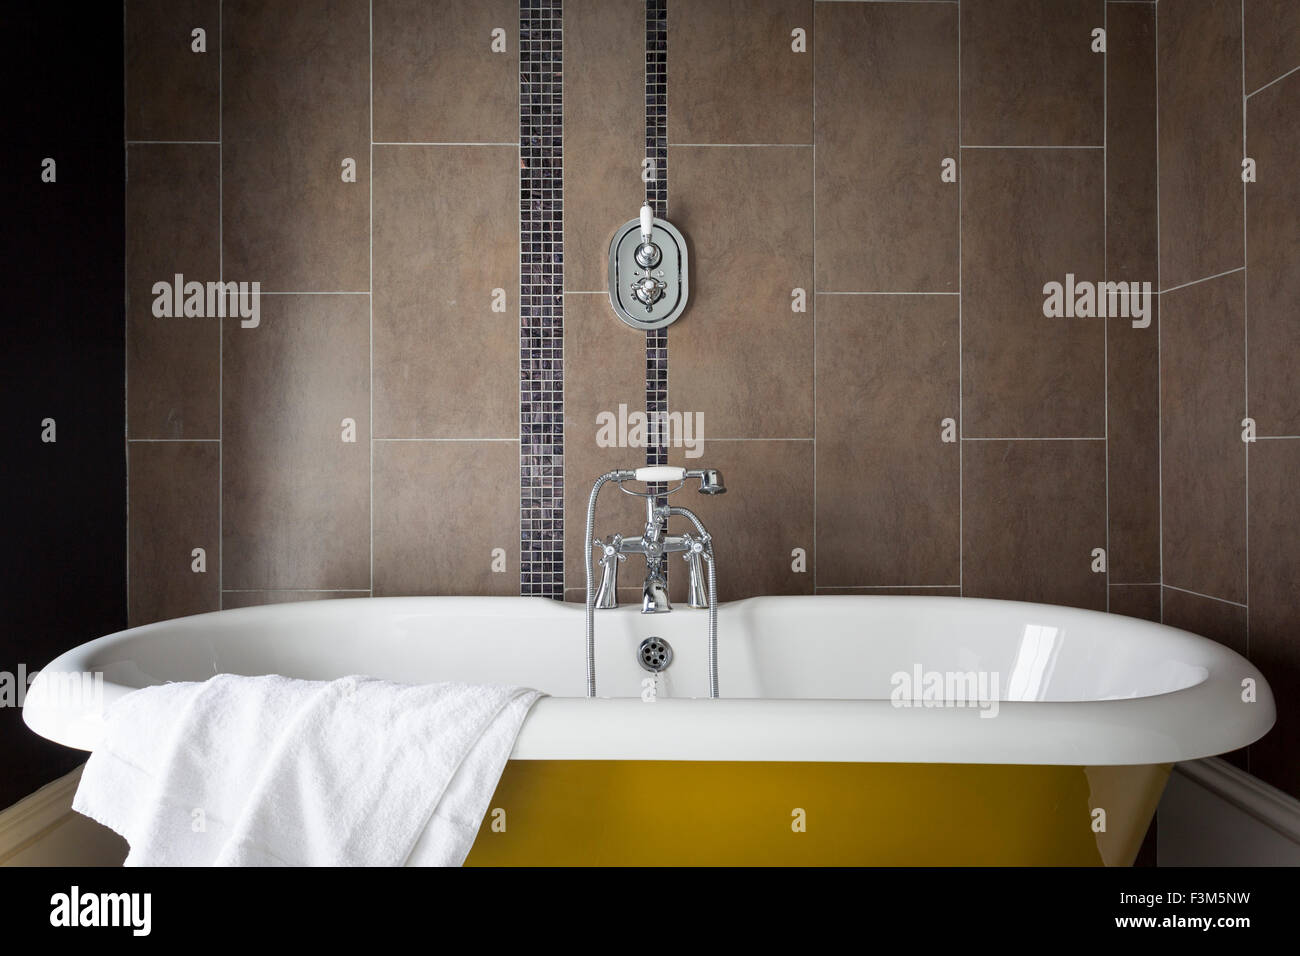 Roll top bath in luxurious bathroom with tiled walls Stock Photo